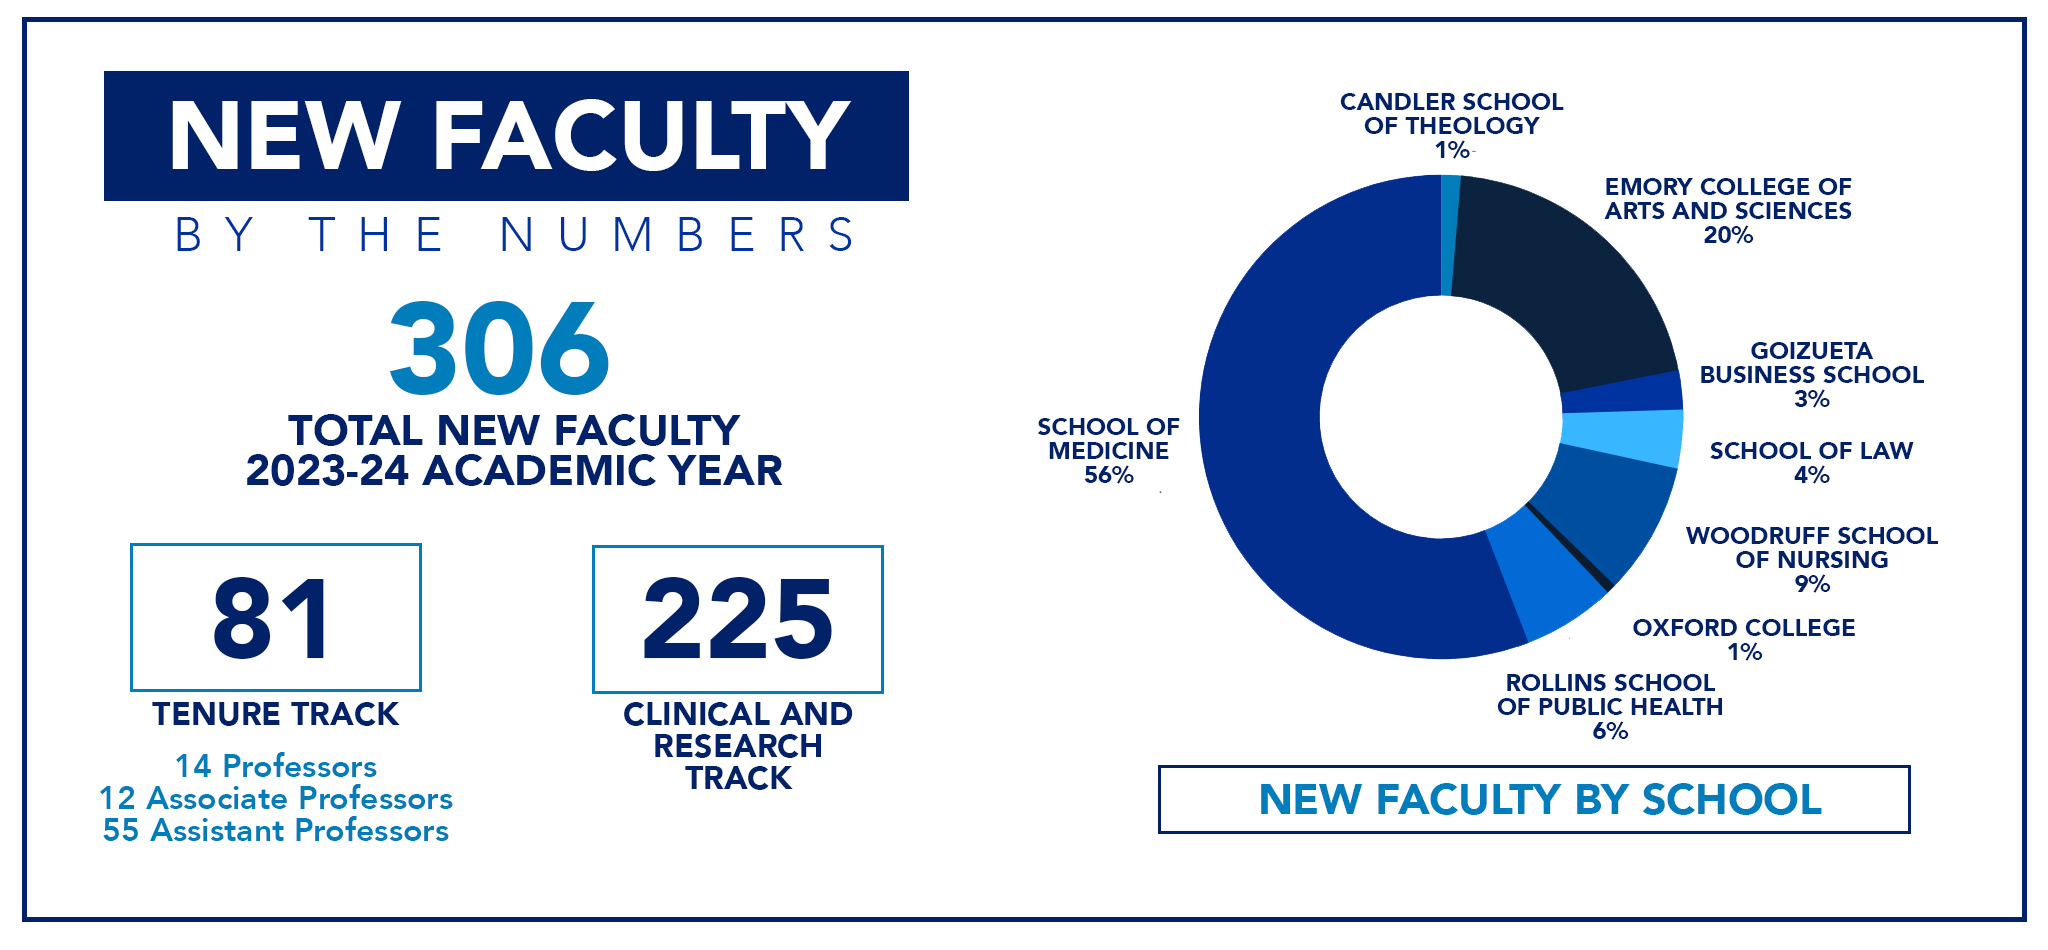 An infographic showing 306 new faculty members with 81 tenure track and 225 clinical and research track